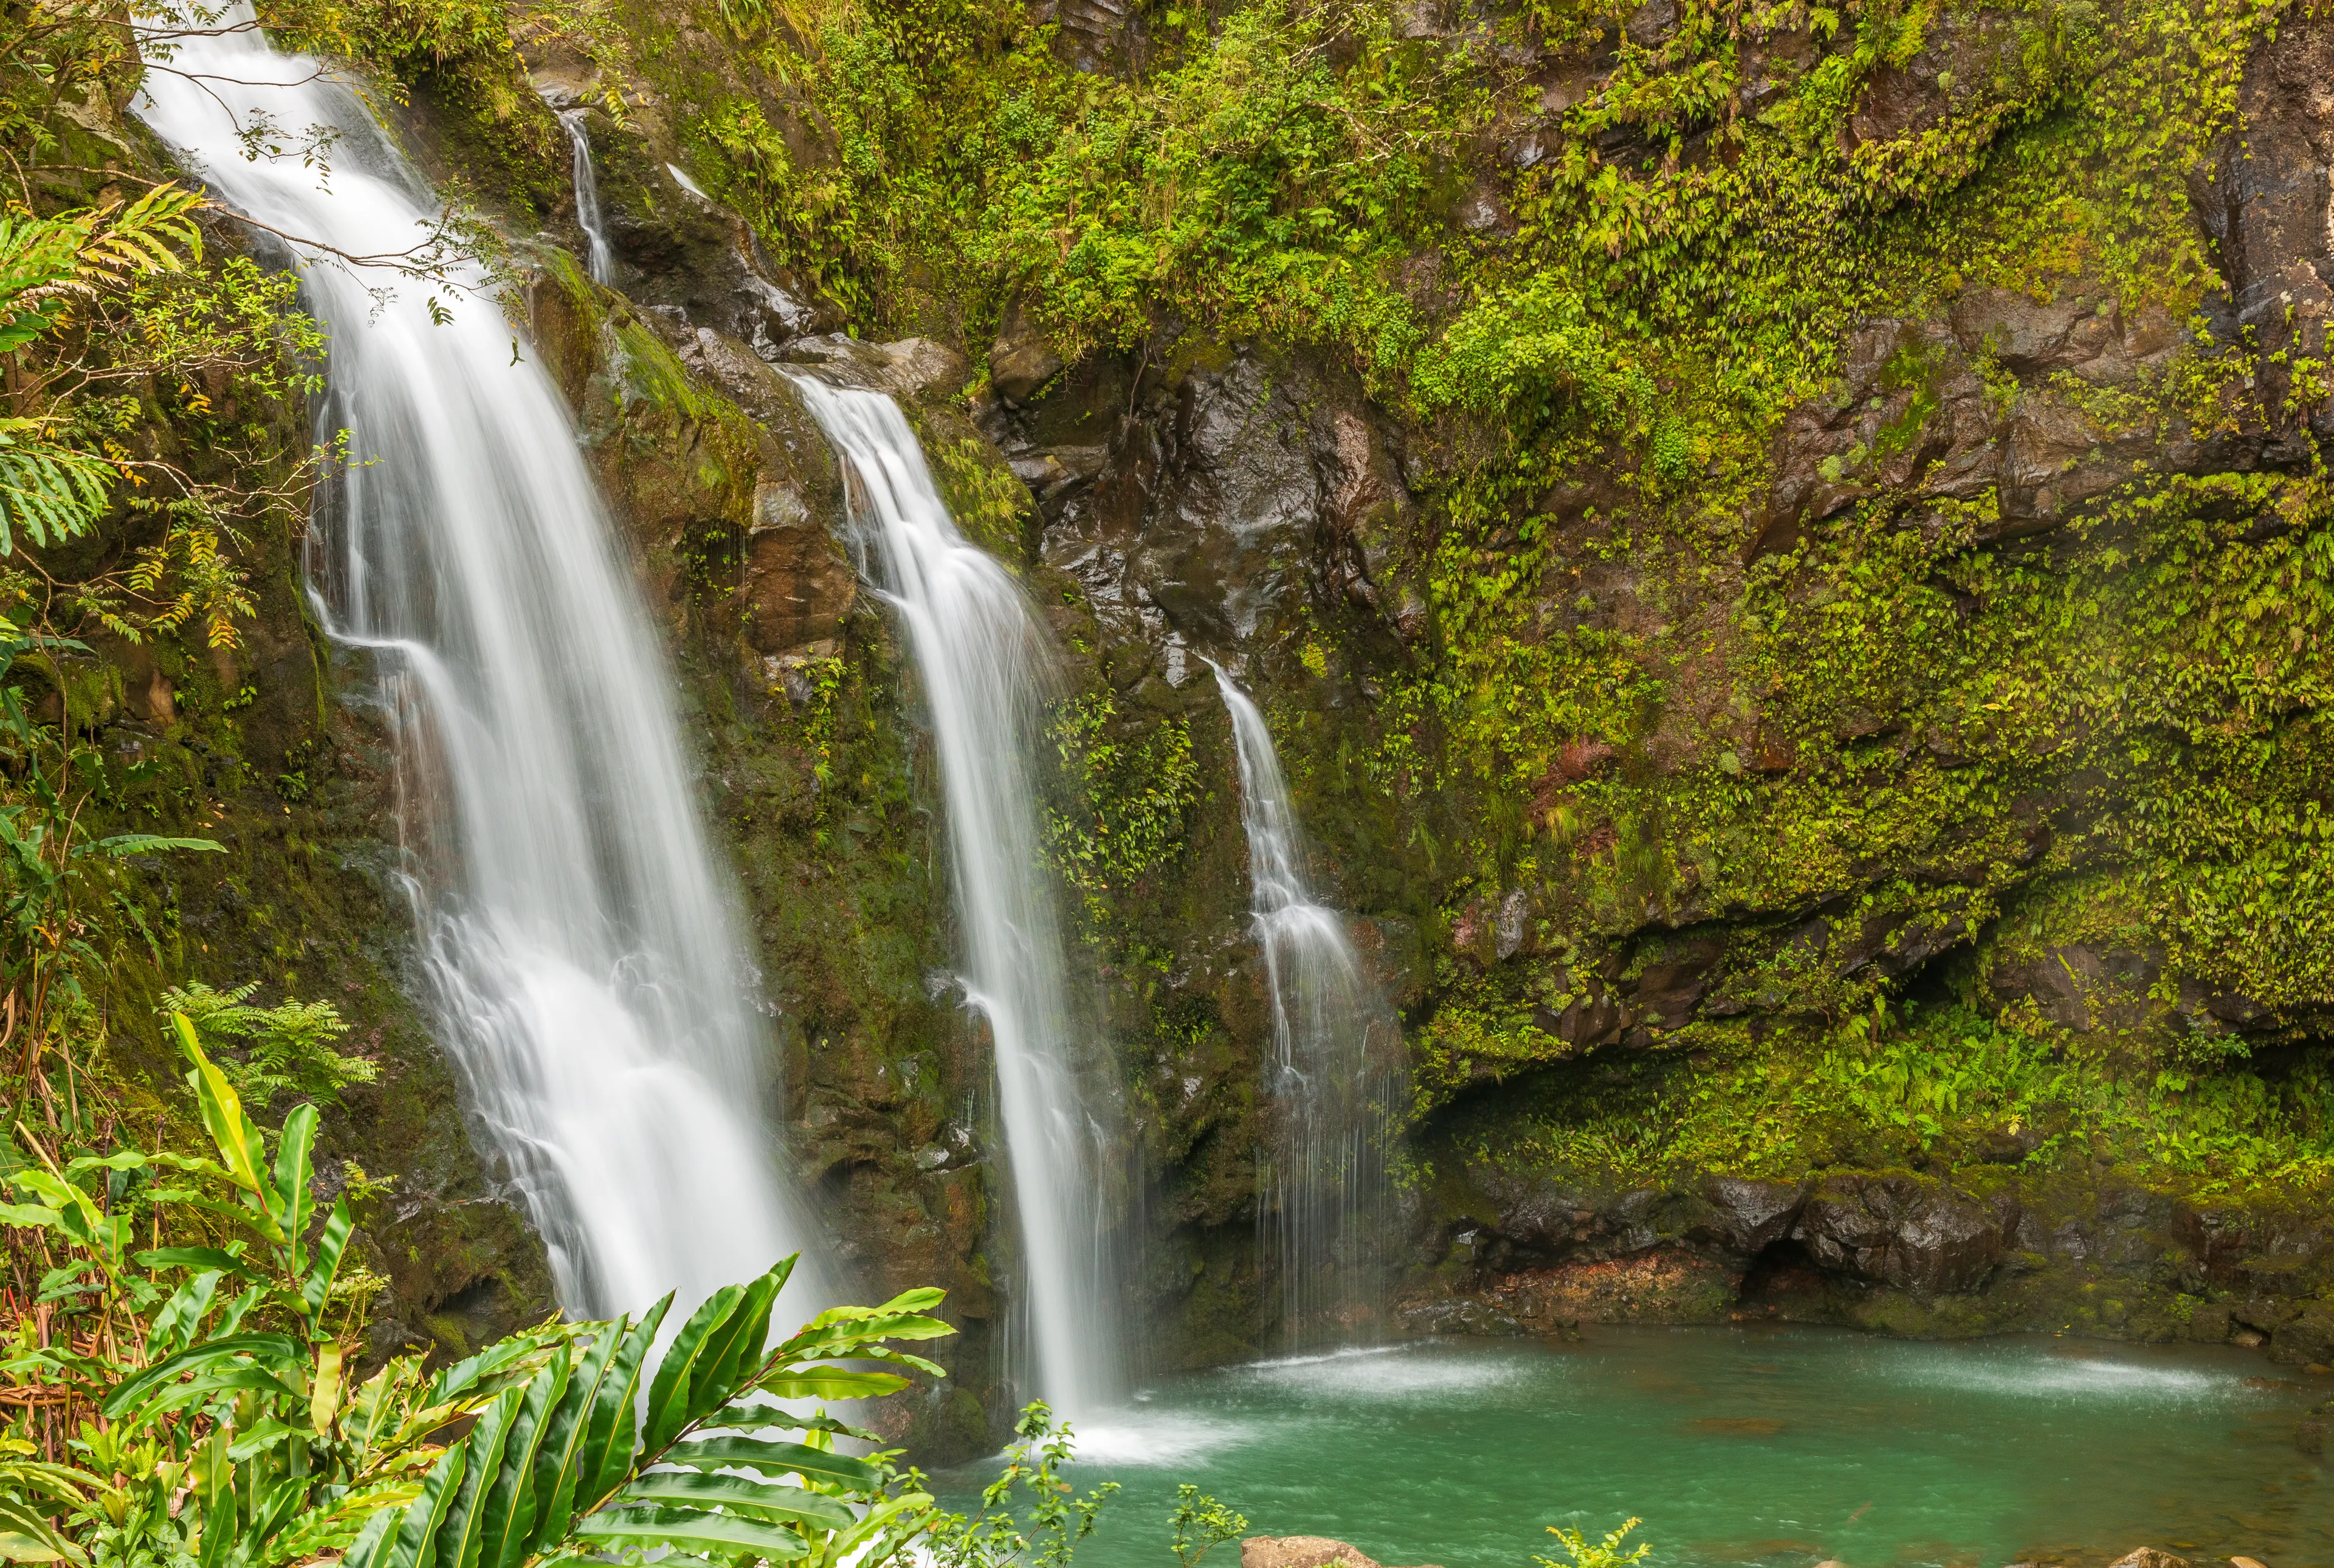 3-Day Thrilling Exploration Guide to Maui, Hawaii